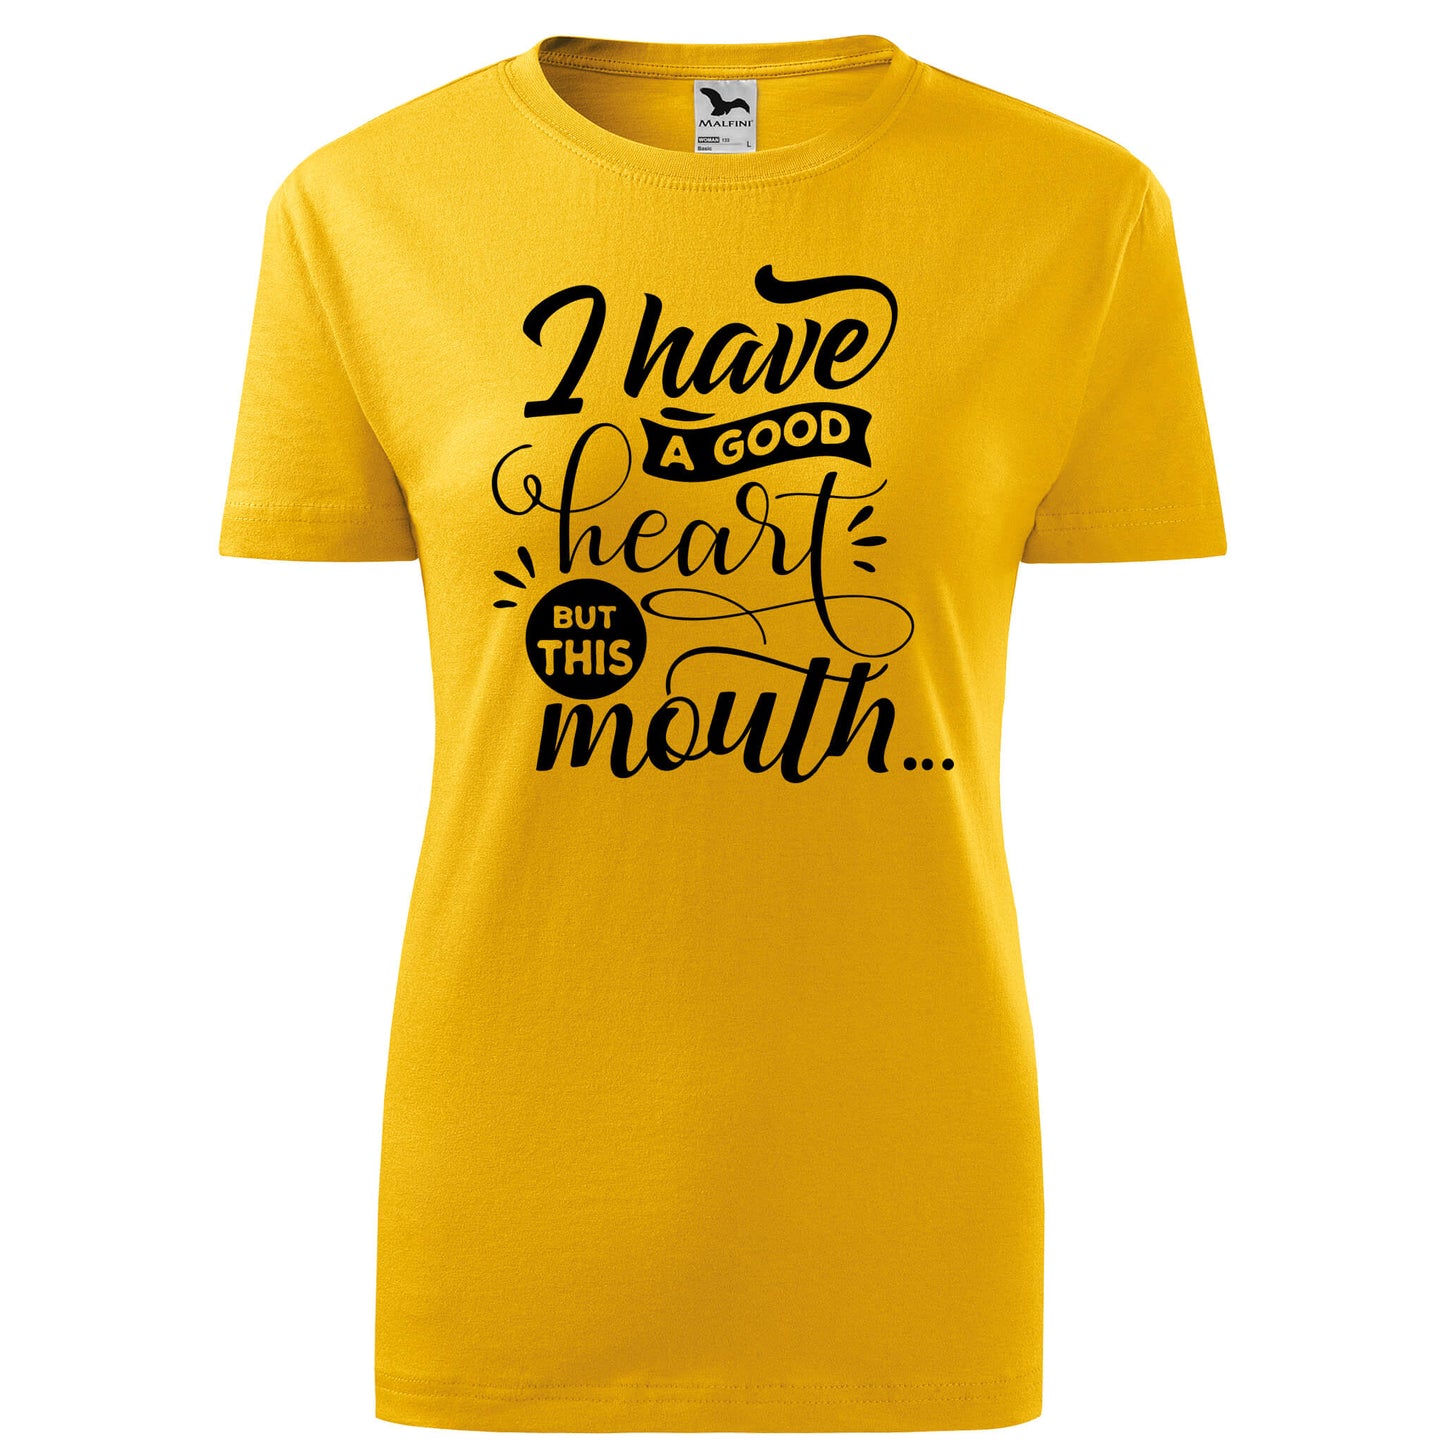 I have a good heart but this mouth t-shirt - rvdesignprint